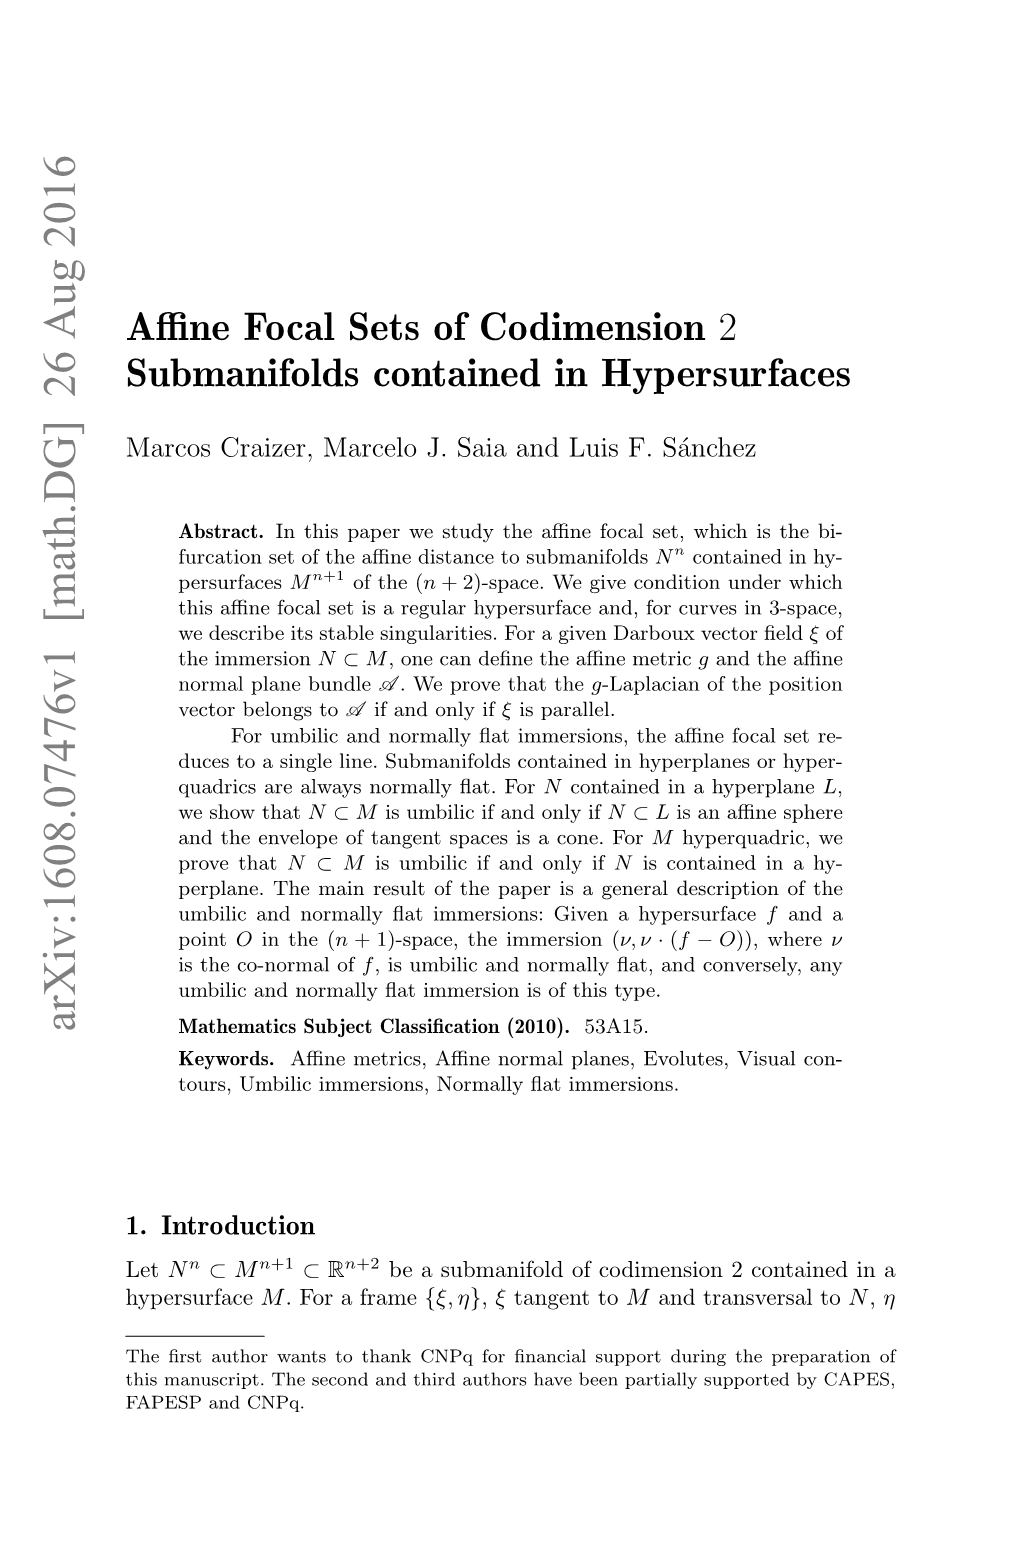 Affine Focal Sets of Codimension $2 $ Submanifolds Contained in Hyper